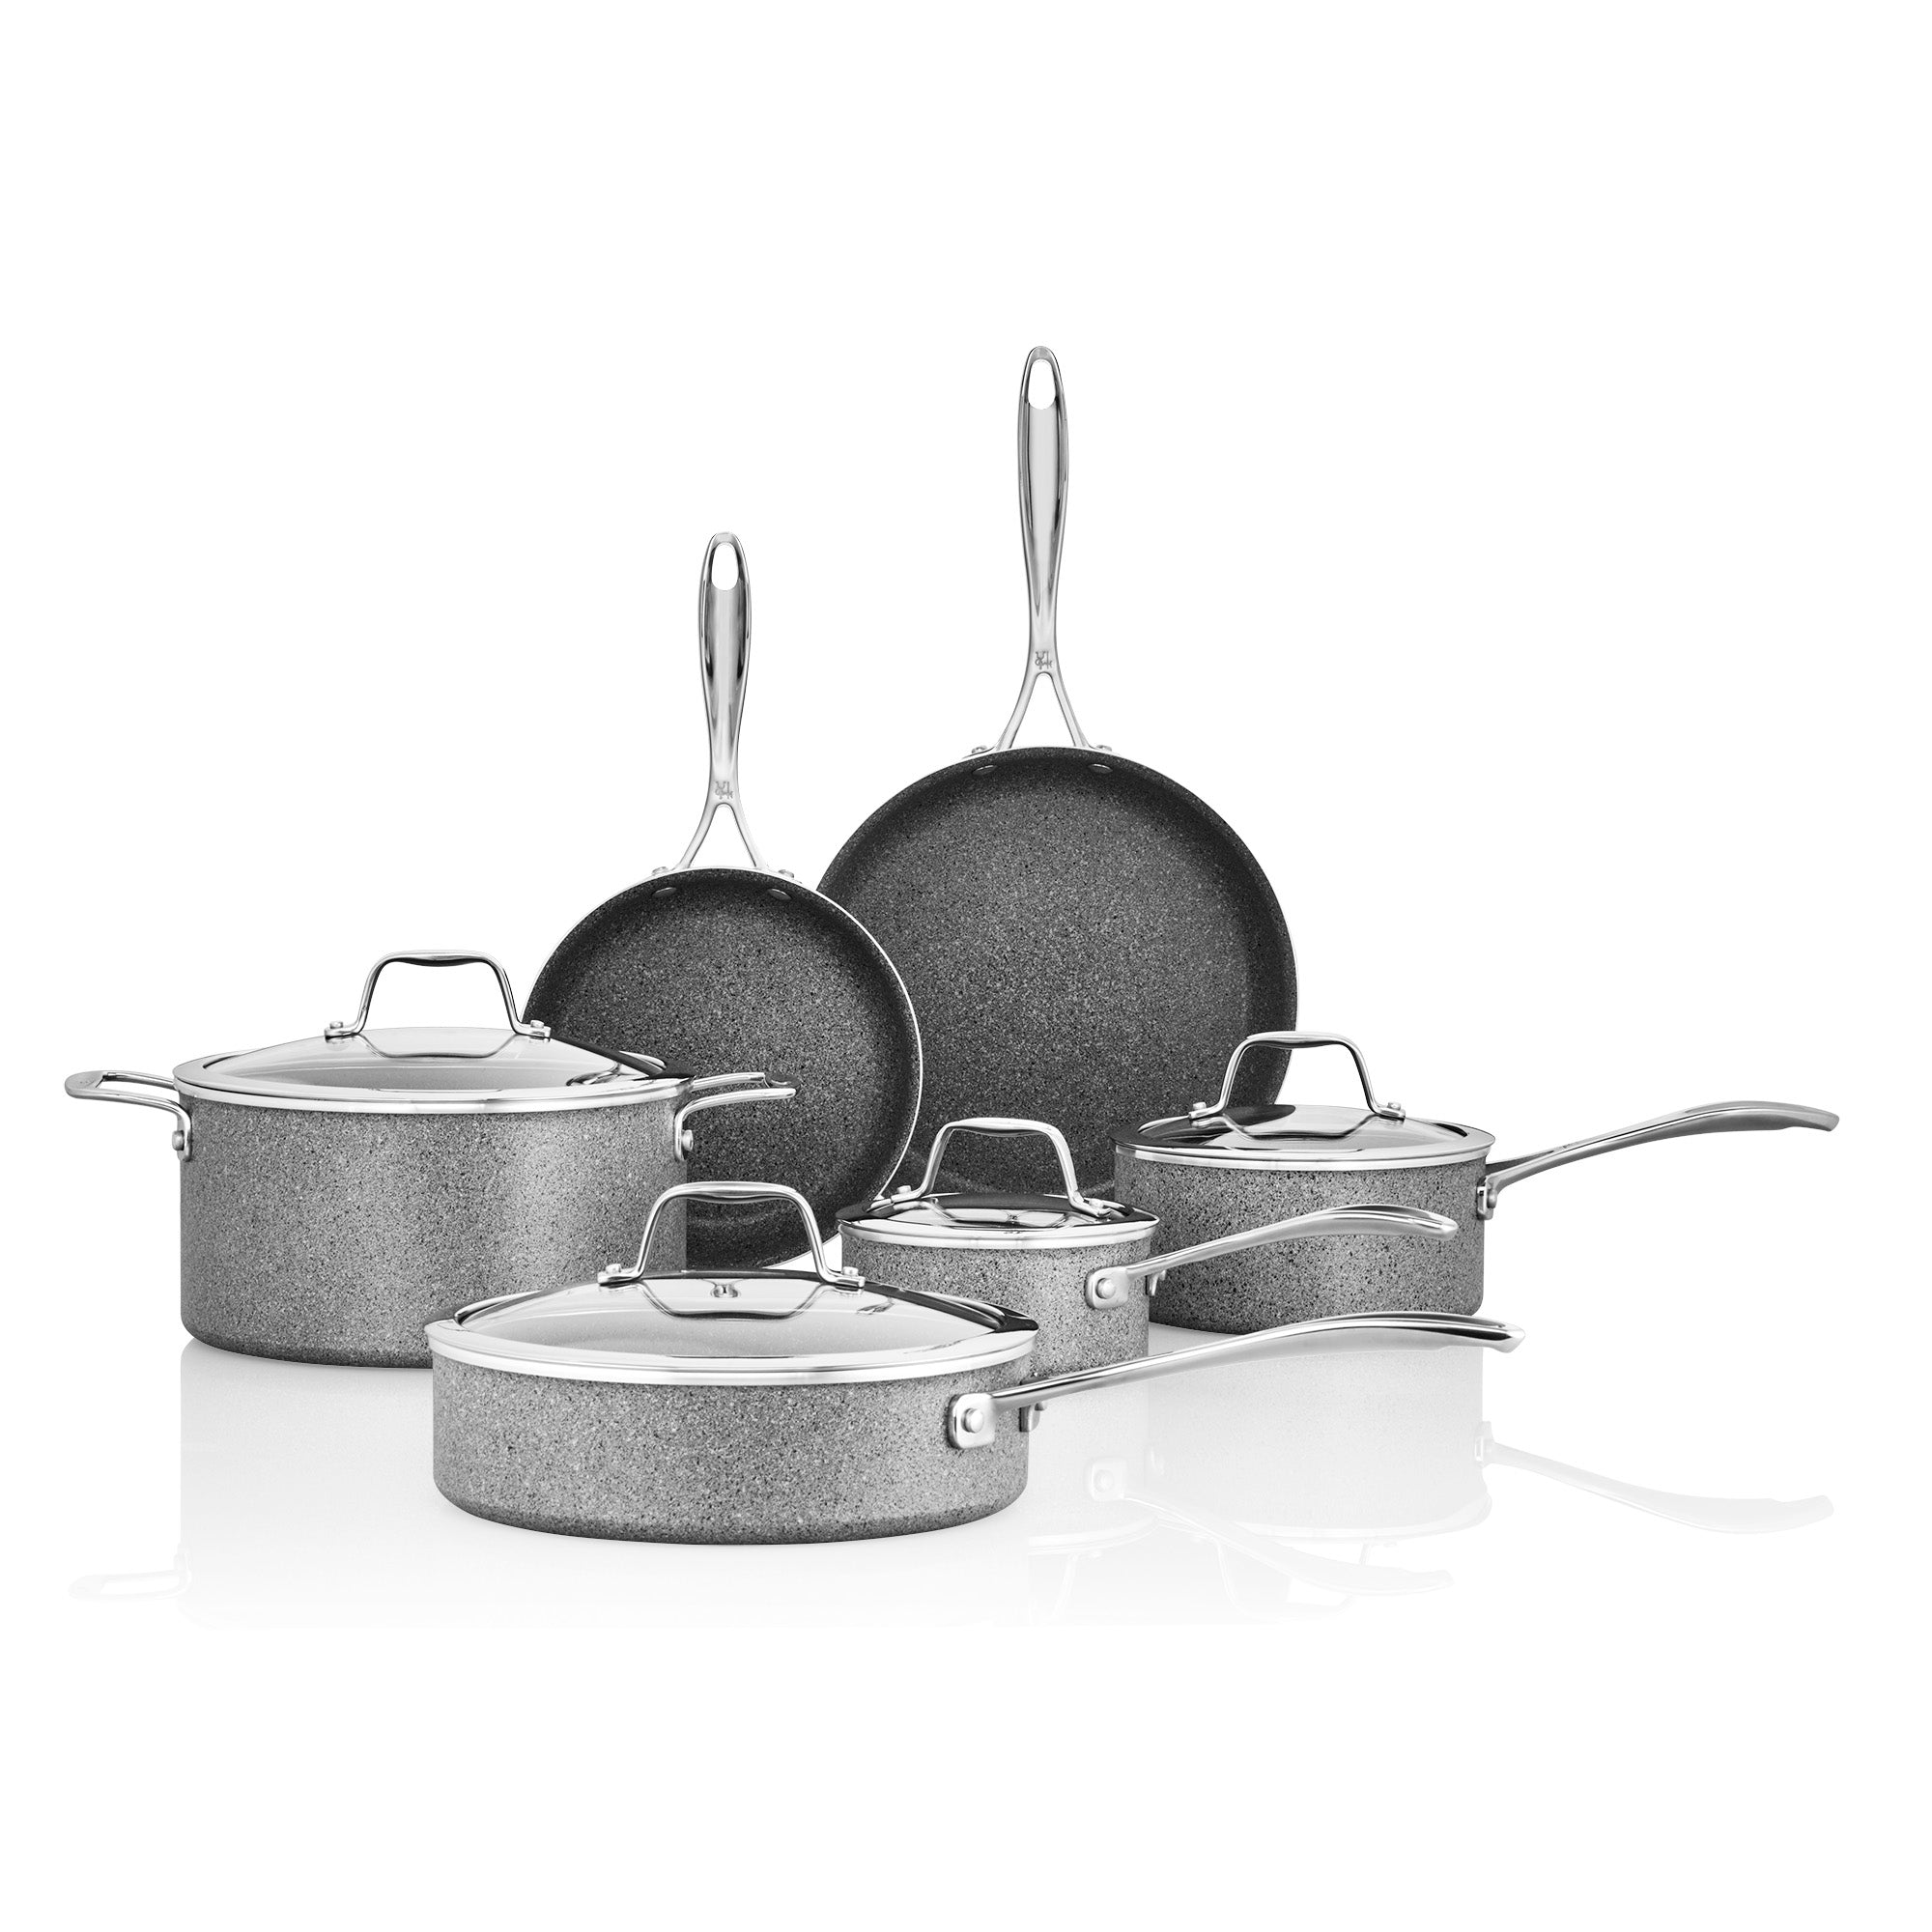 Dreamfarm Ultimate Set of the Best | The Only Non-Stick Kitchen Cooking Set  You Need | Multi-Purpose…See more Dreamfarm Ultimate Set of the Best | The